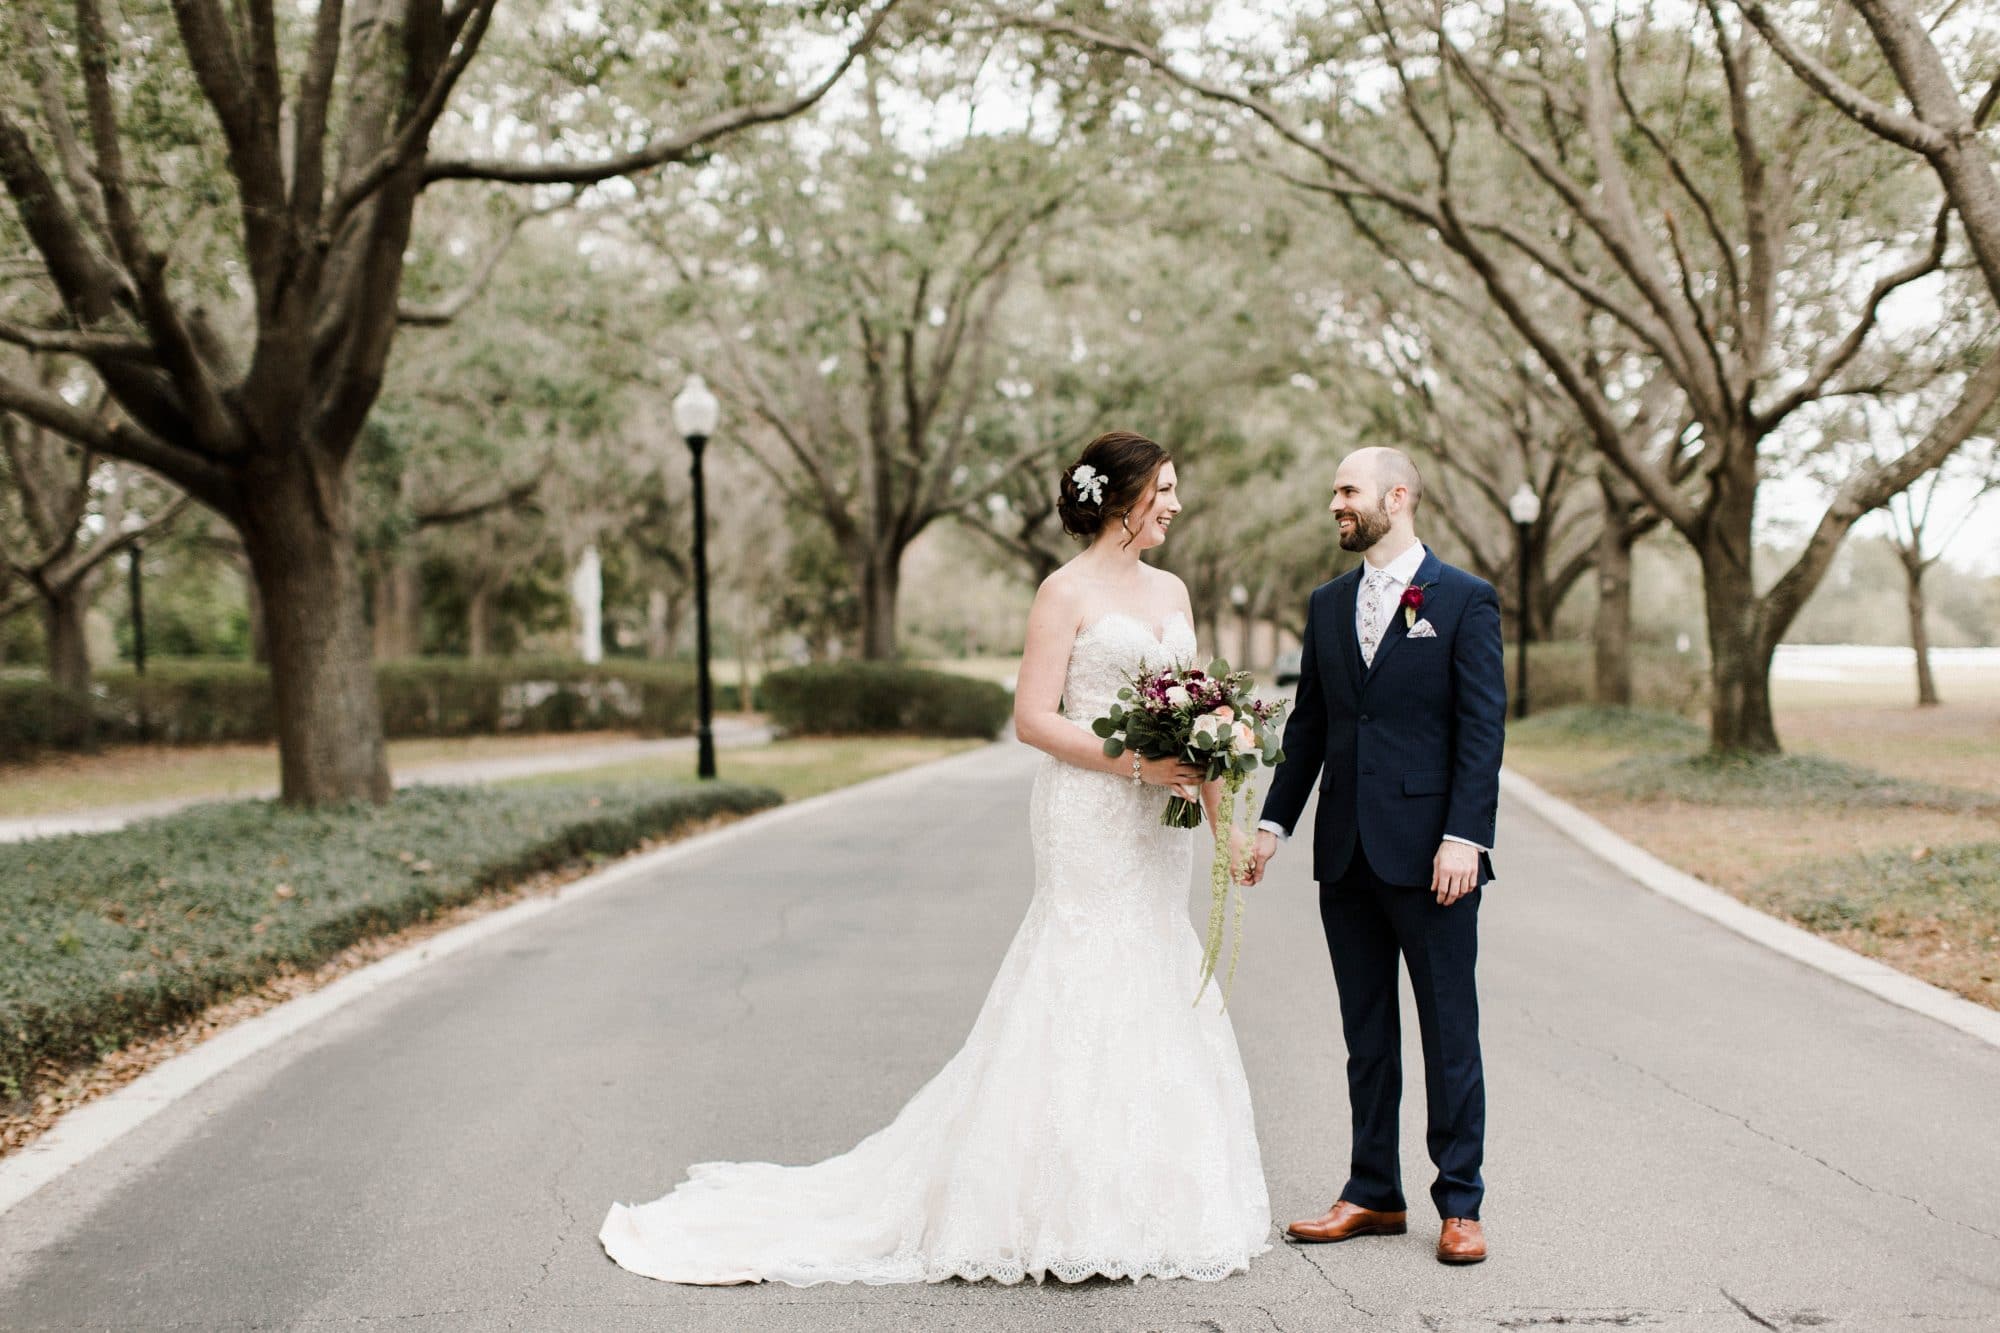 Cypress Grove Estate House - bride and groom in tree-lined street